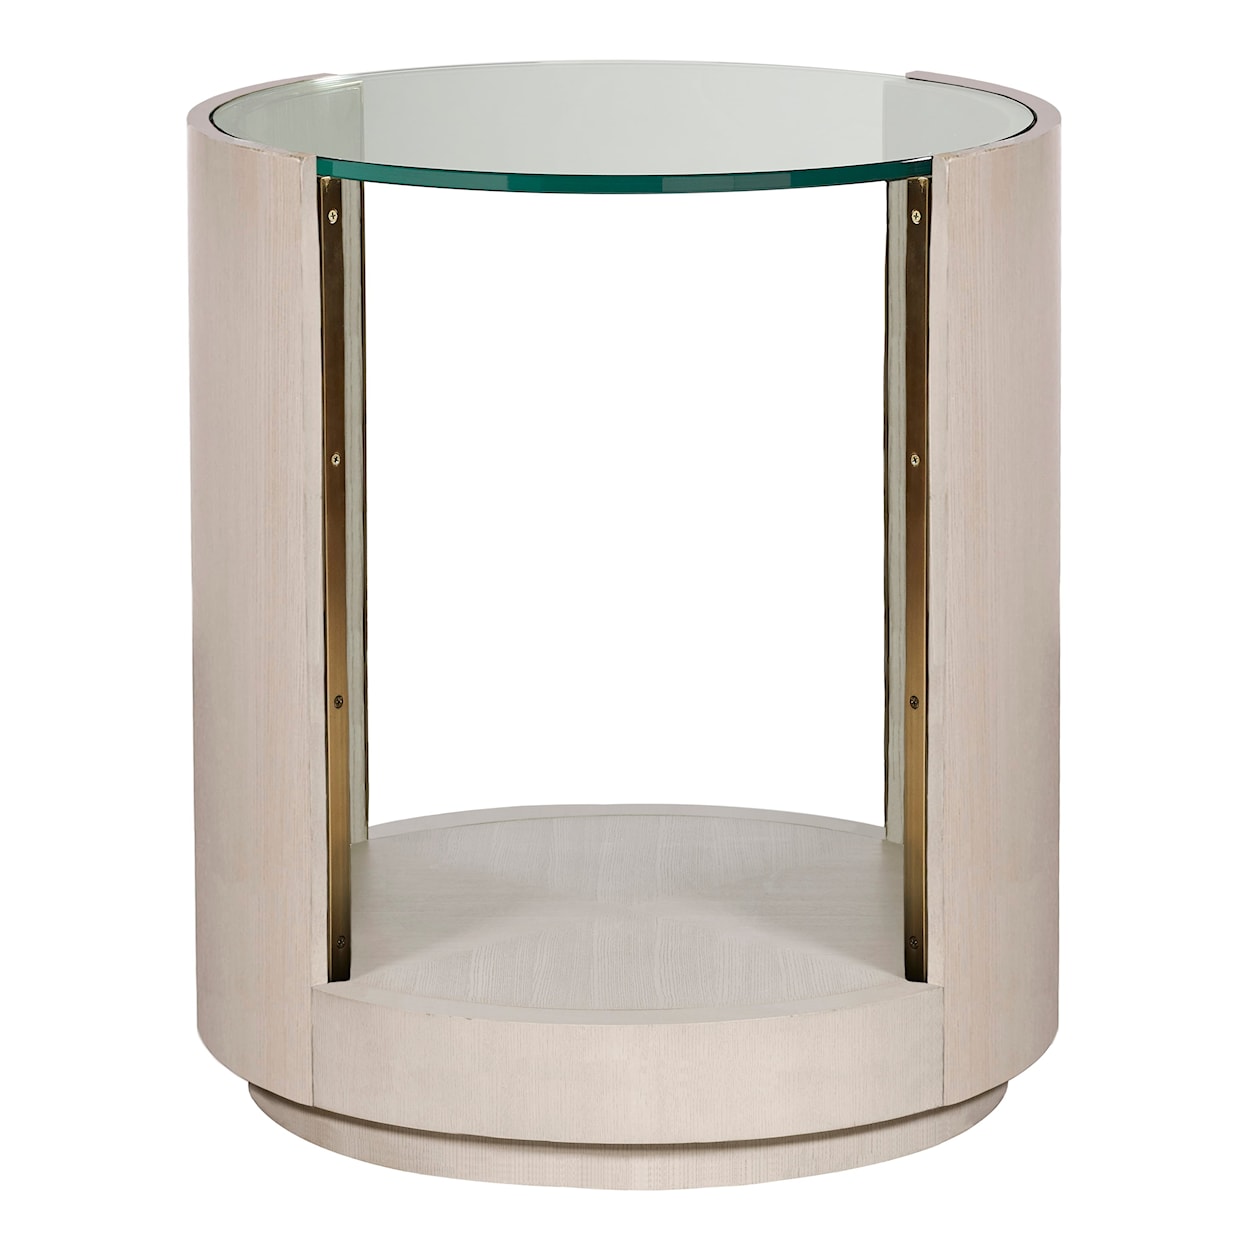 Vanguard Furniture Axis Side Table